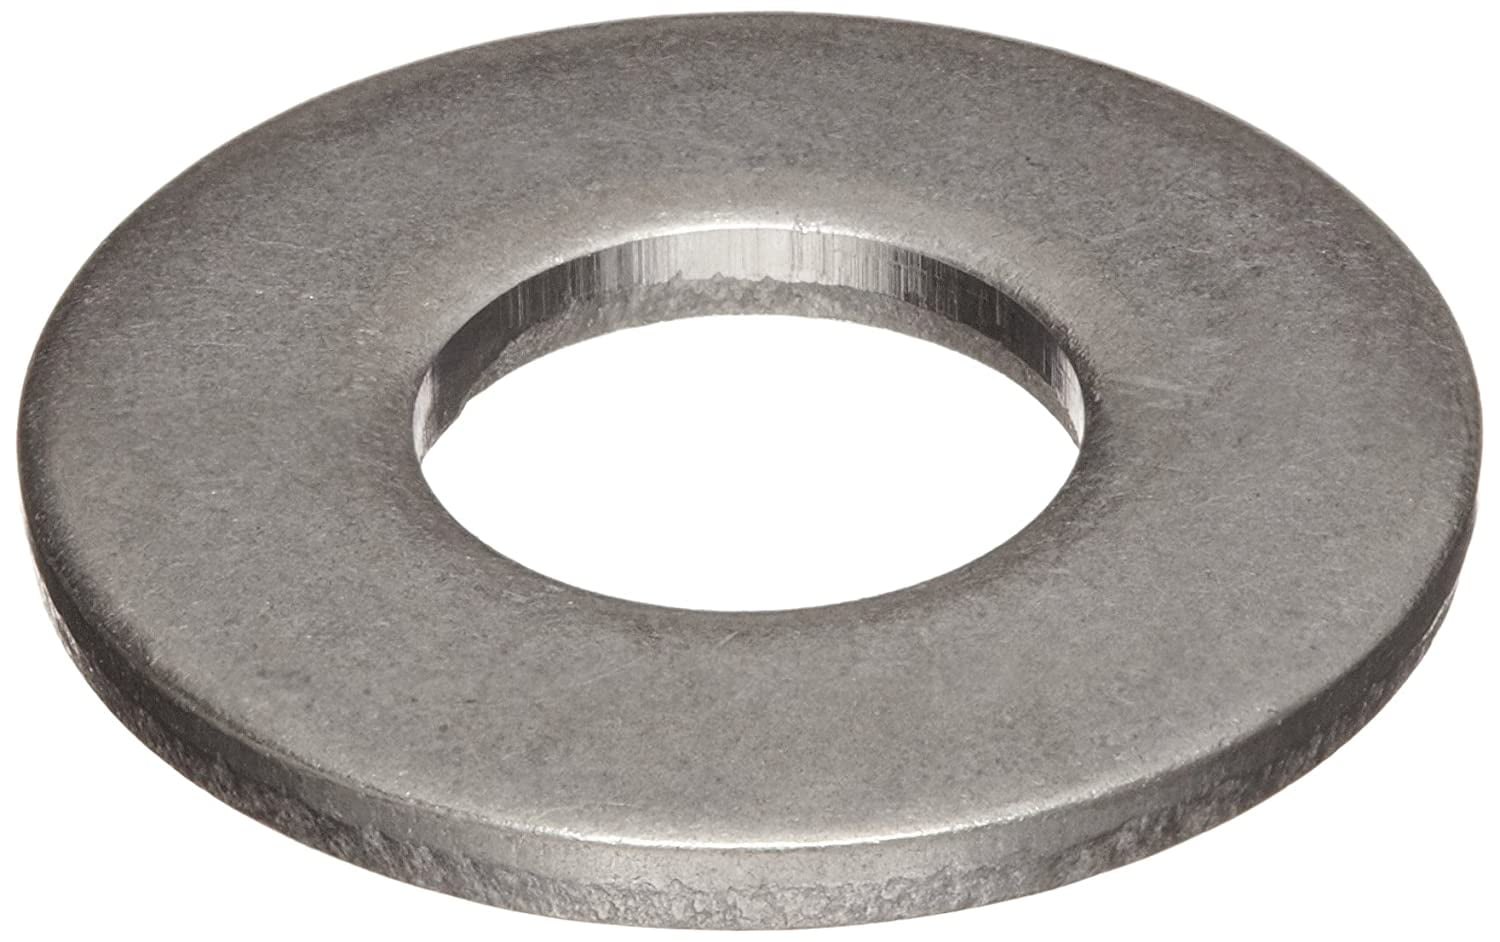 1/4" x 5/8" x 0.05 Commercial Flat Washer Stainless Steel 316 